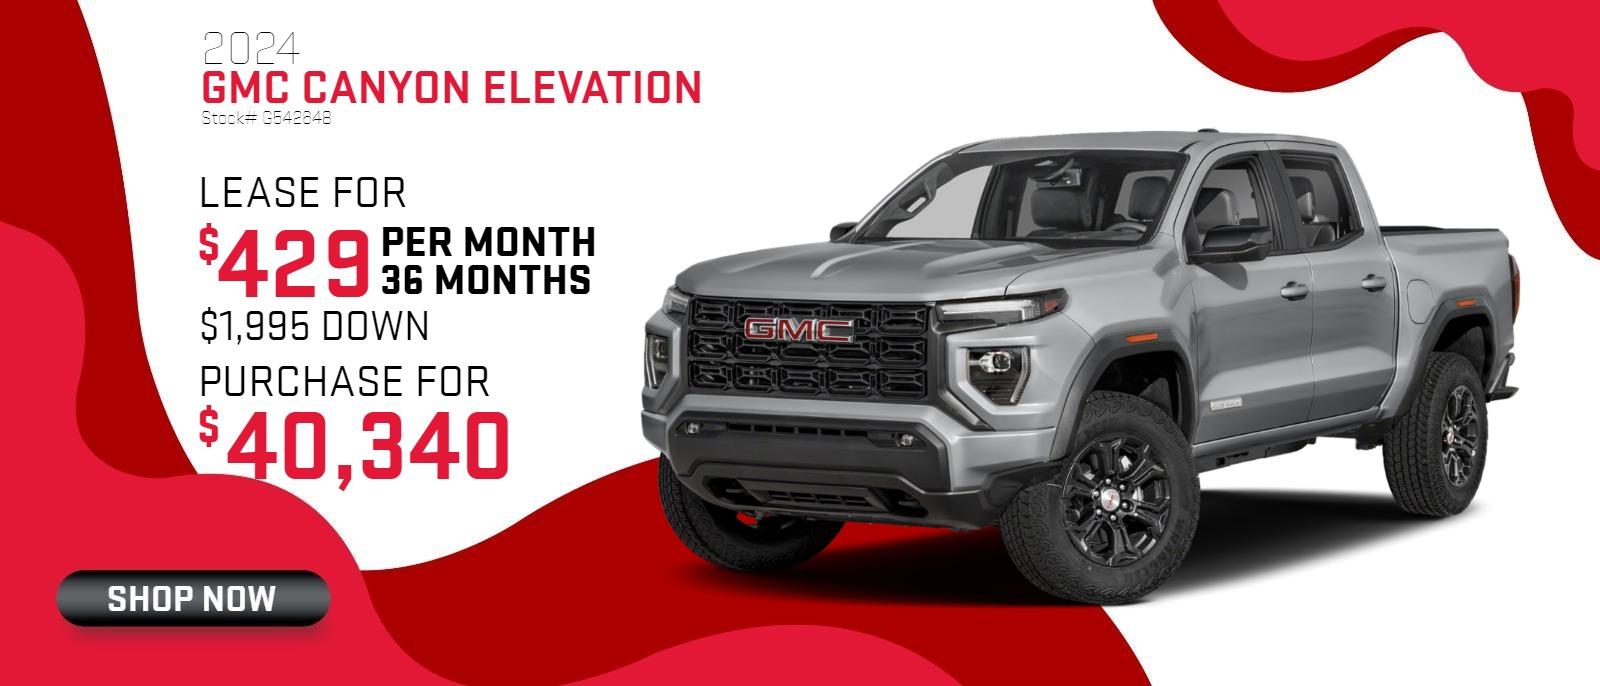 2024 Canyon Elevation
Stock# G542648
Lease for $429 per month, 36 months, $1995 down
Purchase for $40,340